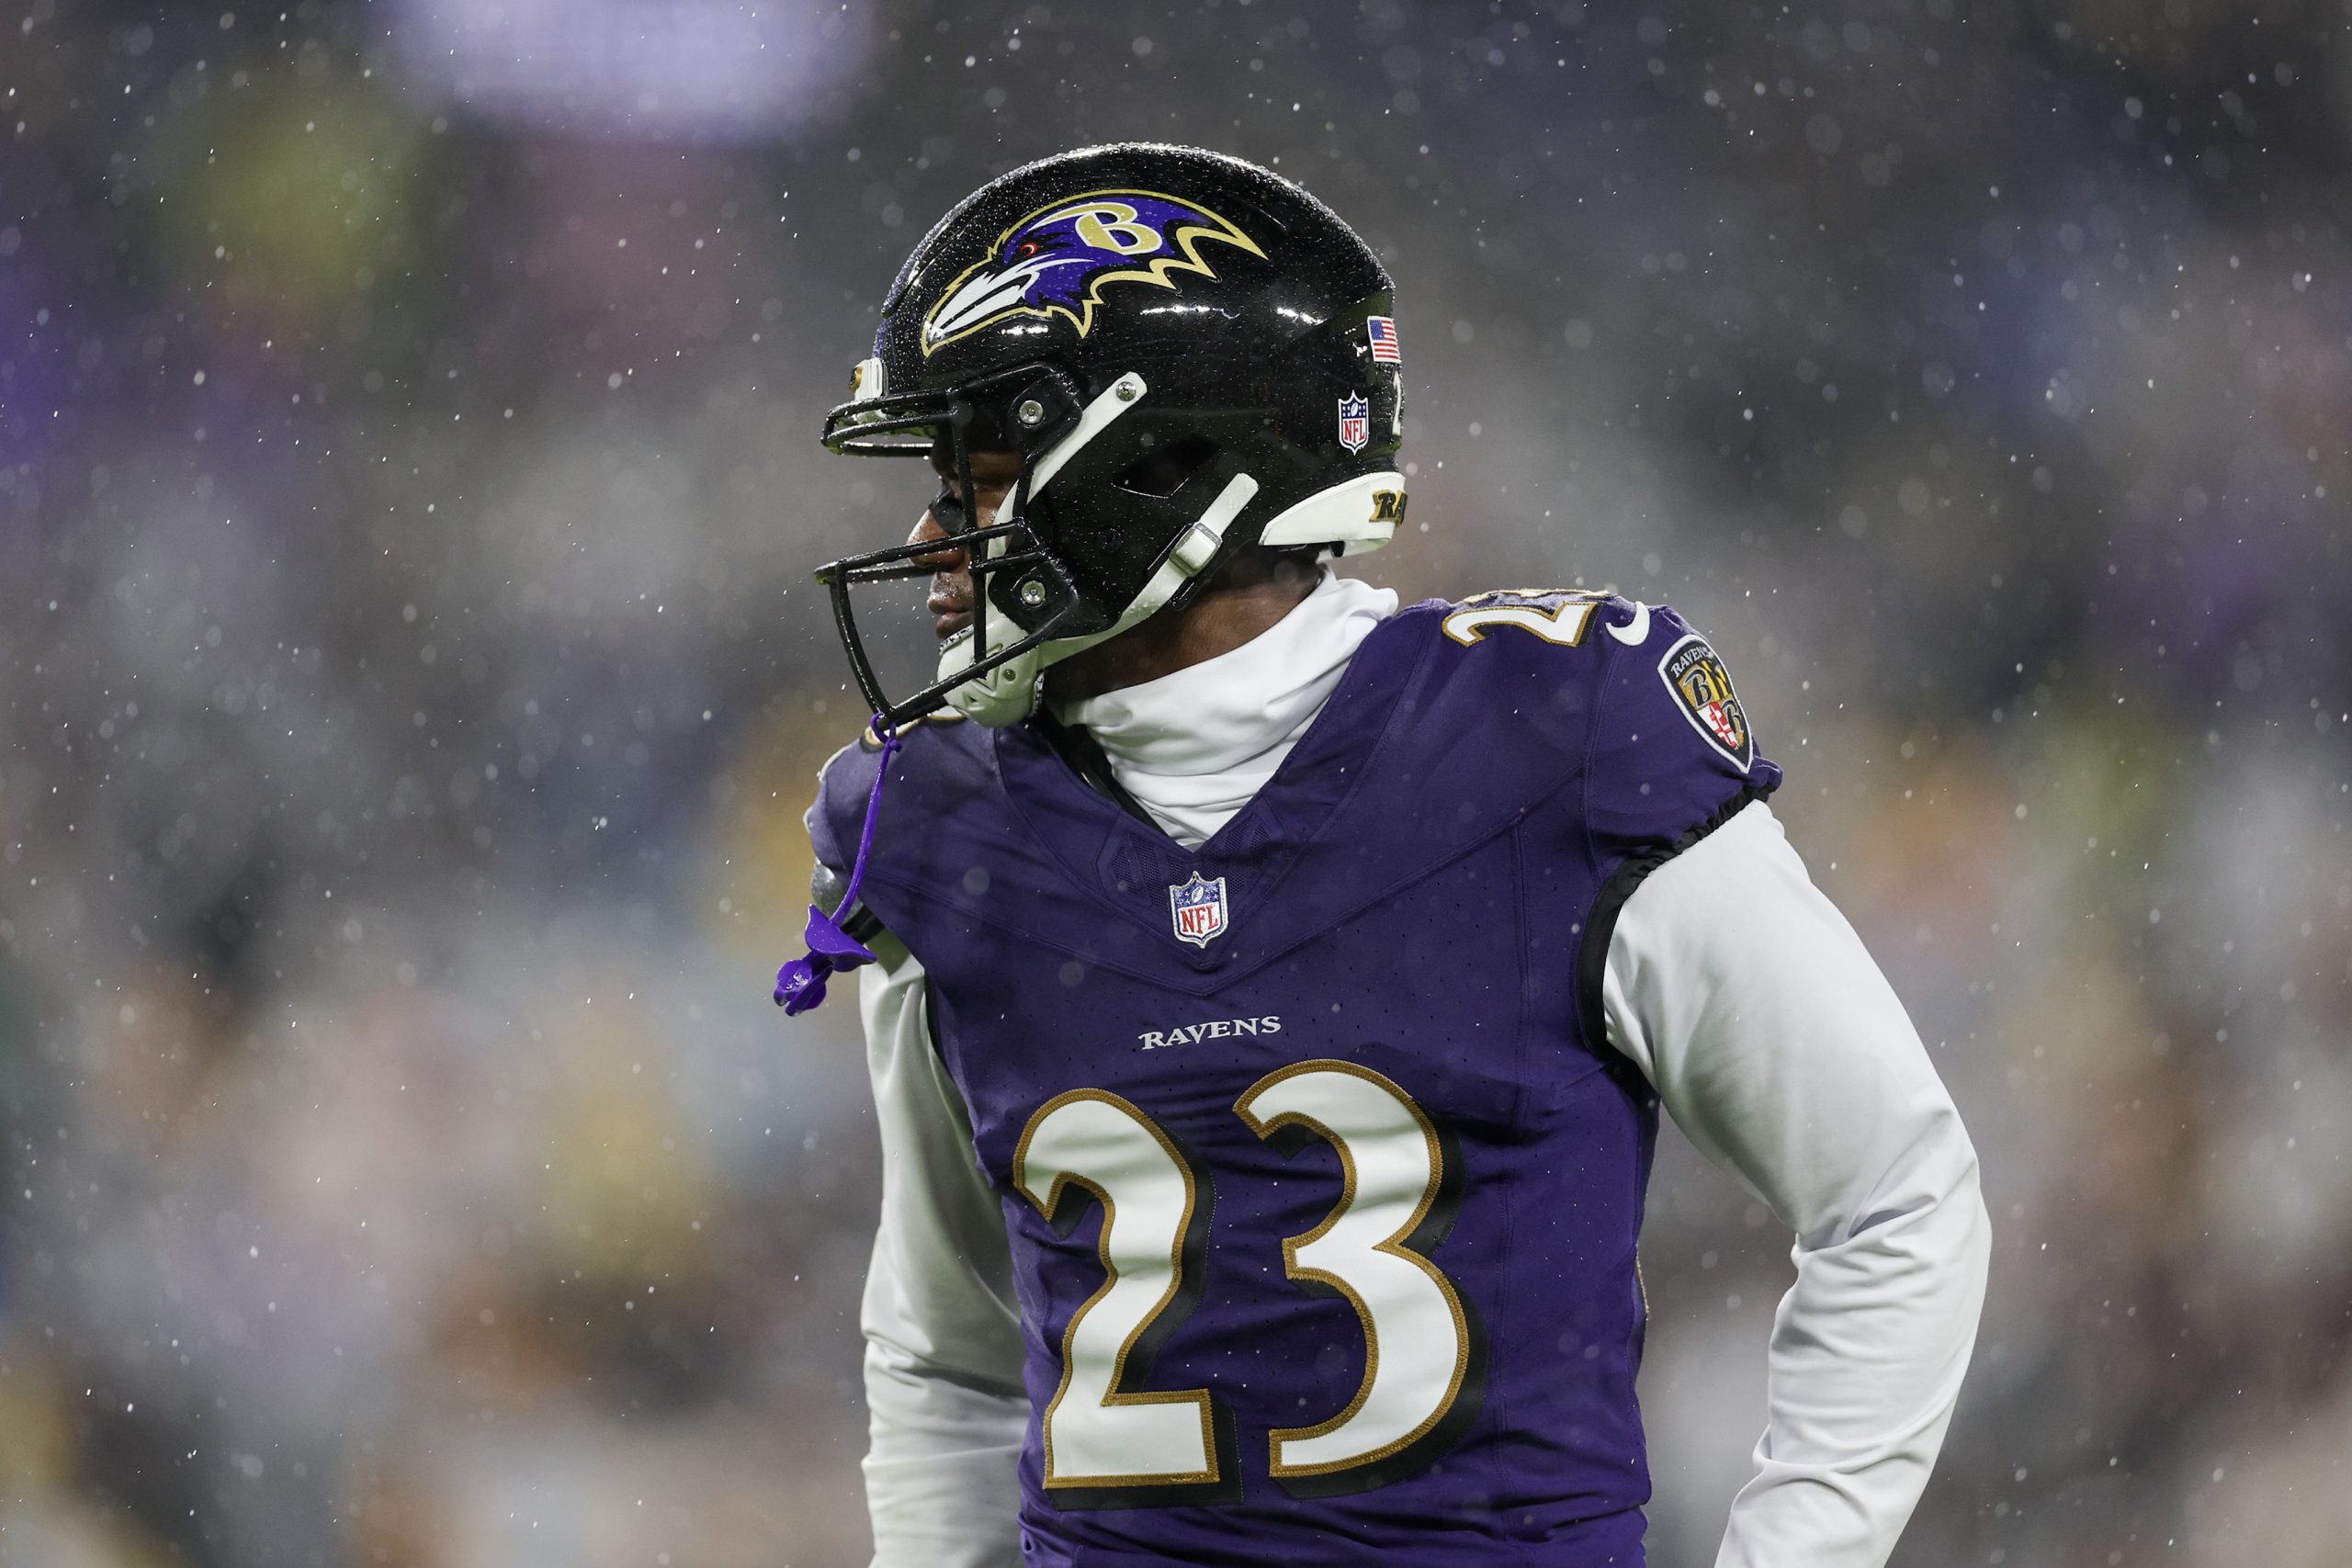 Rock Ya-Sin #23 of the Baltimore Ravens looks on in the second quarter of a game against the Pittsb...